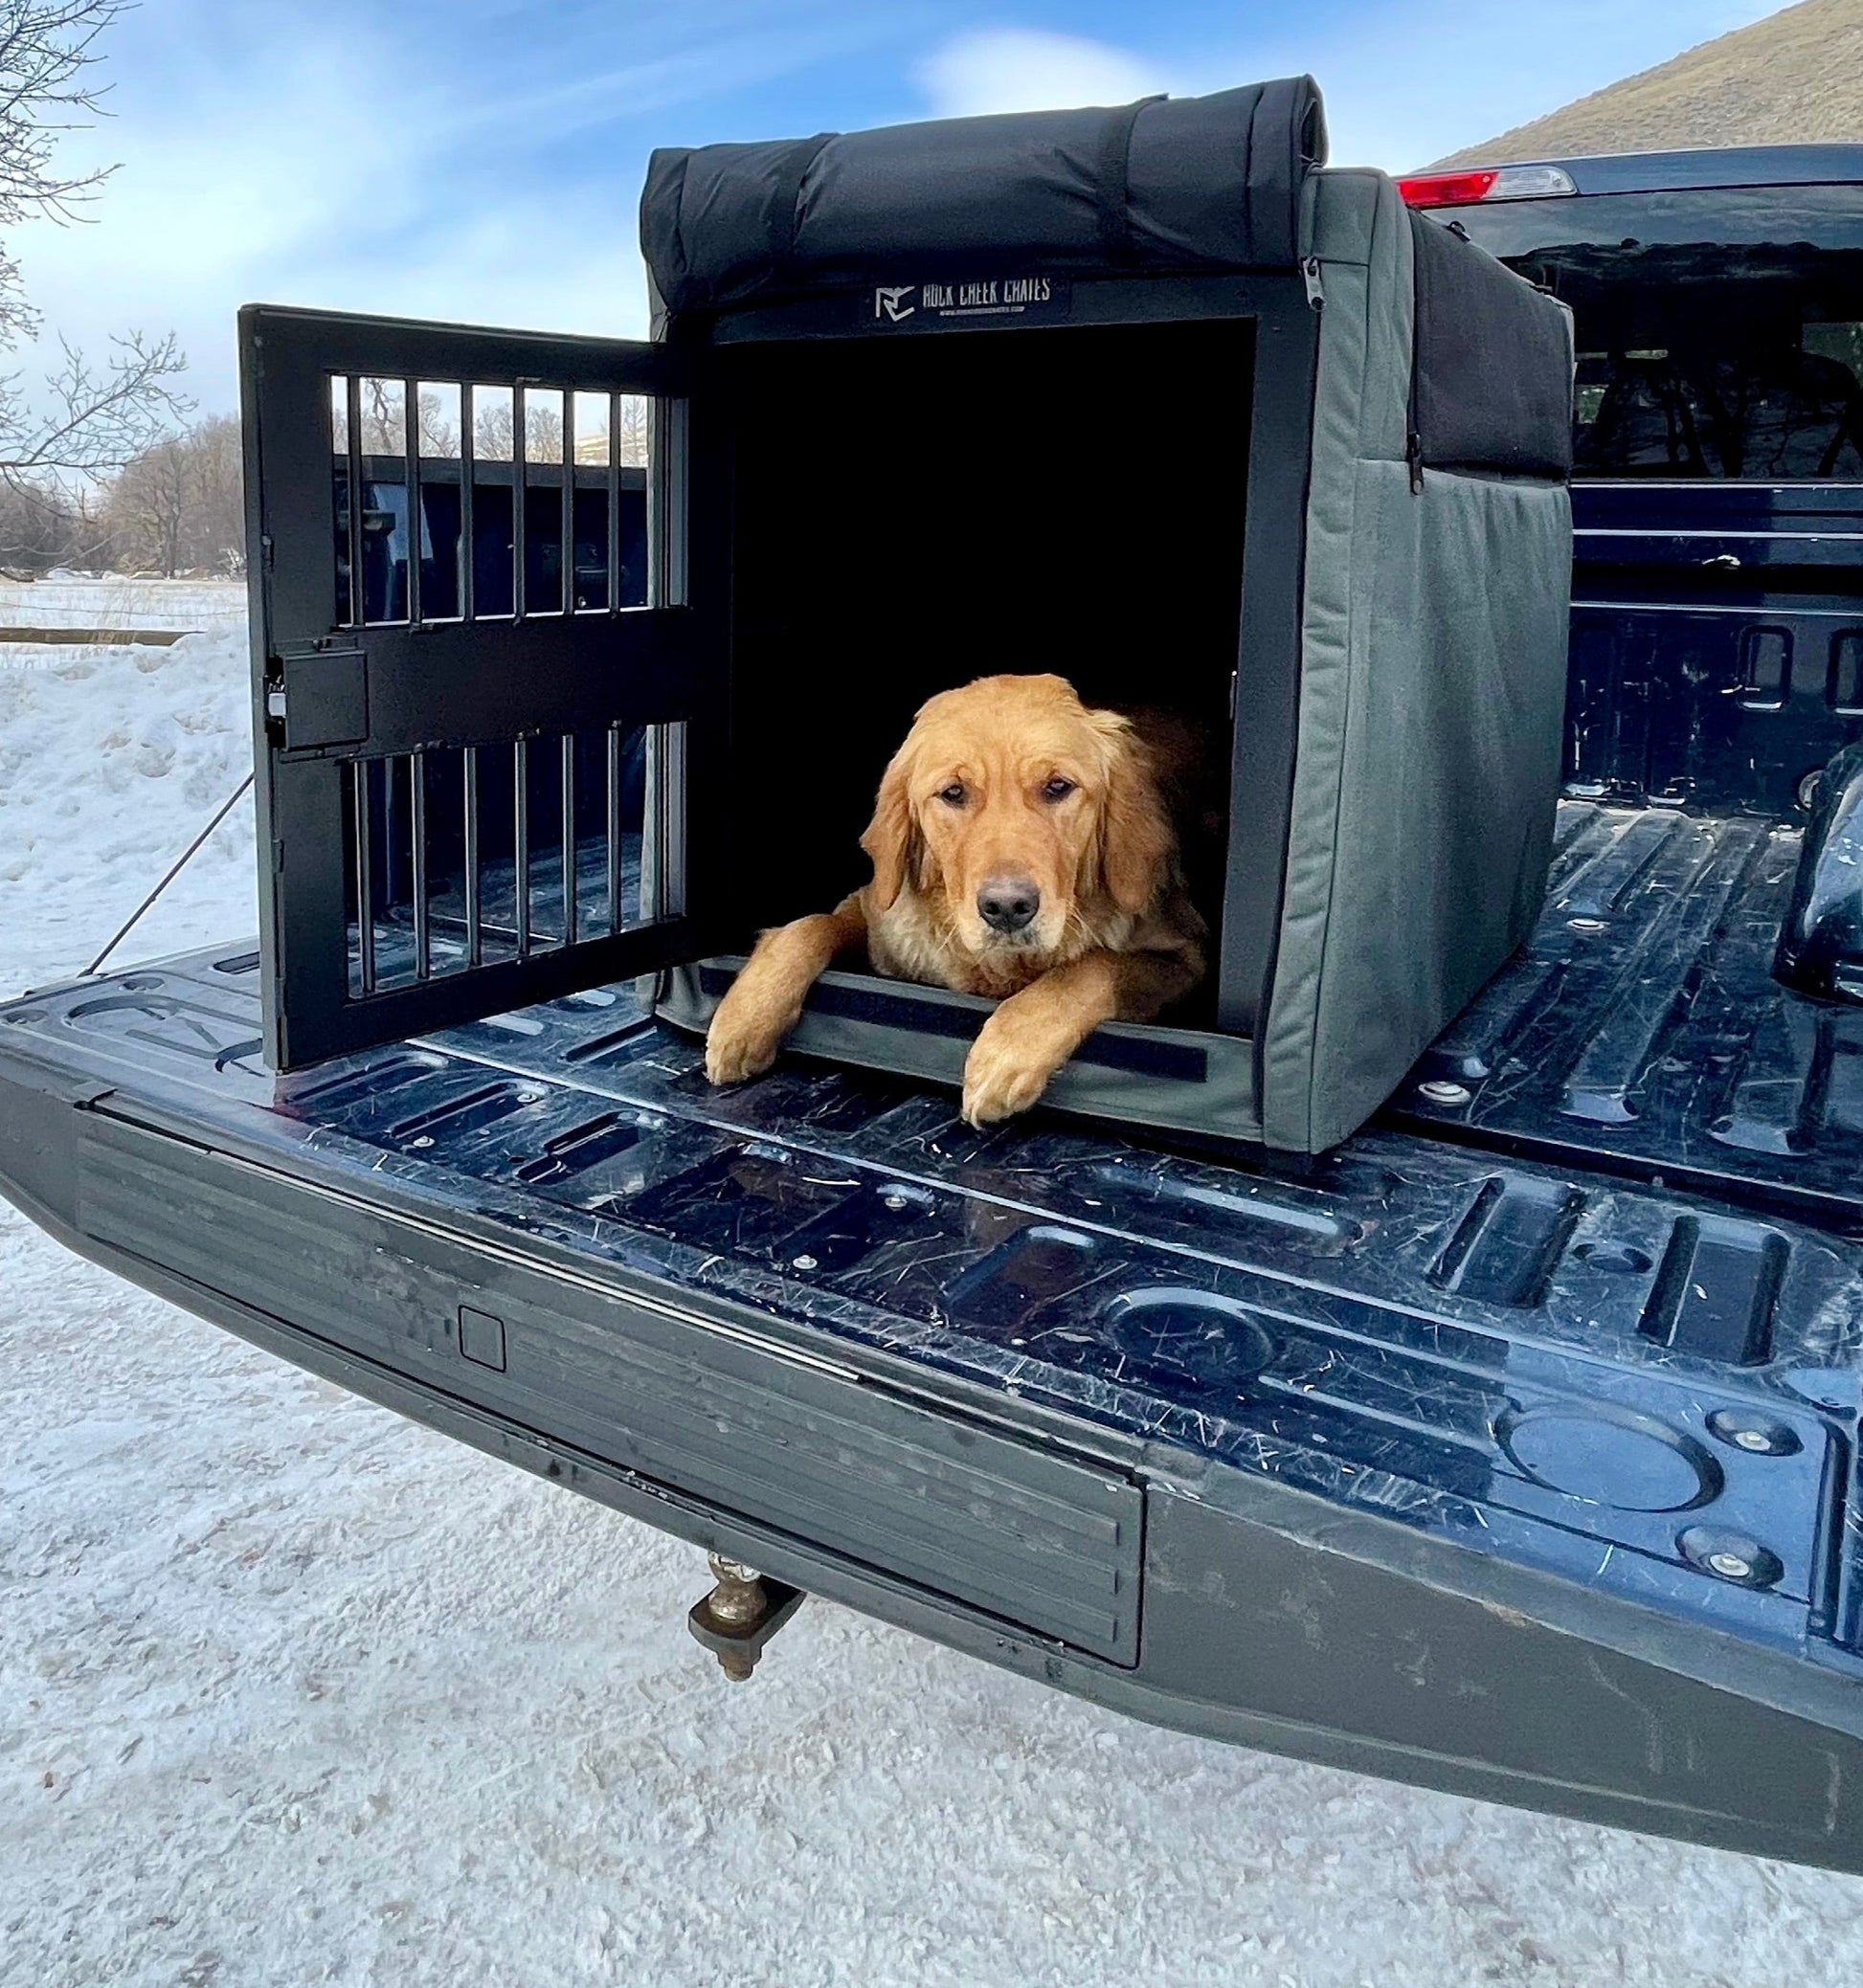 Medium-Size Dog Crate - COOL HUNTING®